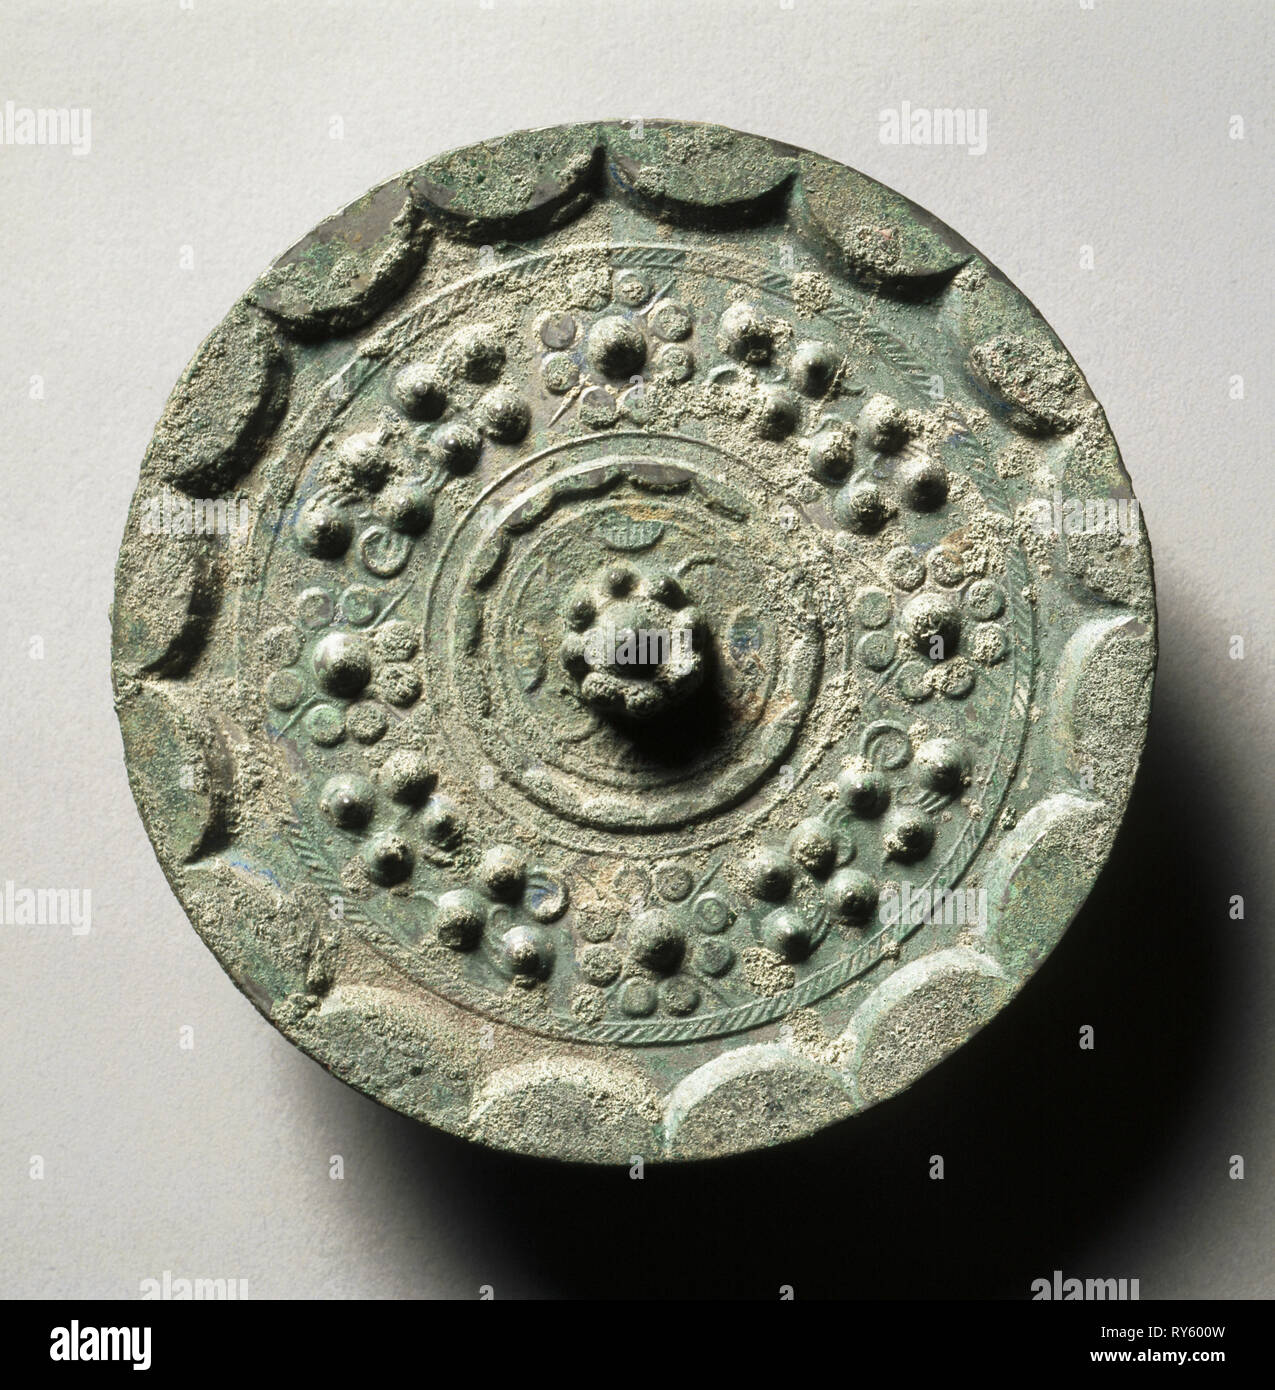 Mirror with Clouds and Nebulae, late 3rd century BC-early 1st century. China, Western Han dynasty (202 BC-AD 9). Bronze; diameter: 13 cm (5 1/8 in.); overall: 1.7 cm (11/16 in.); rim: 0.6 cm (1/4 in Stock Photo